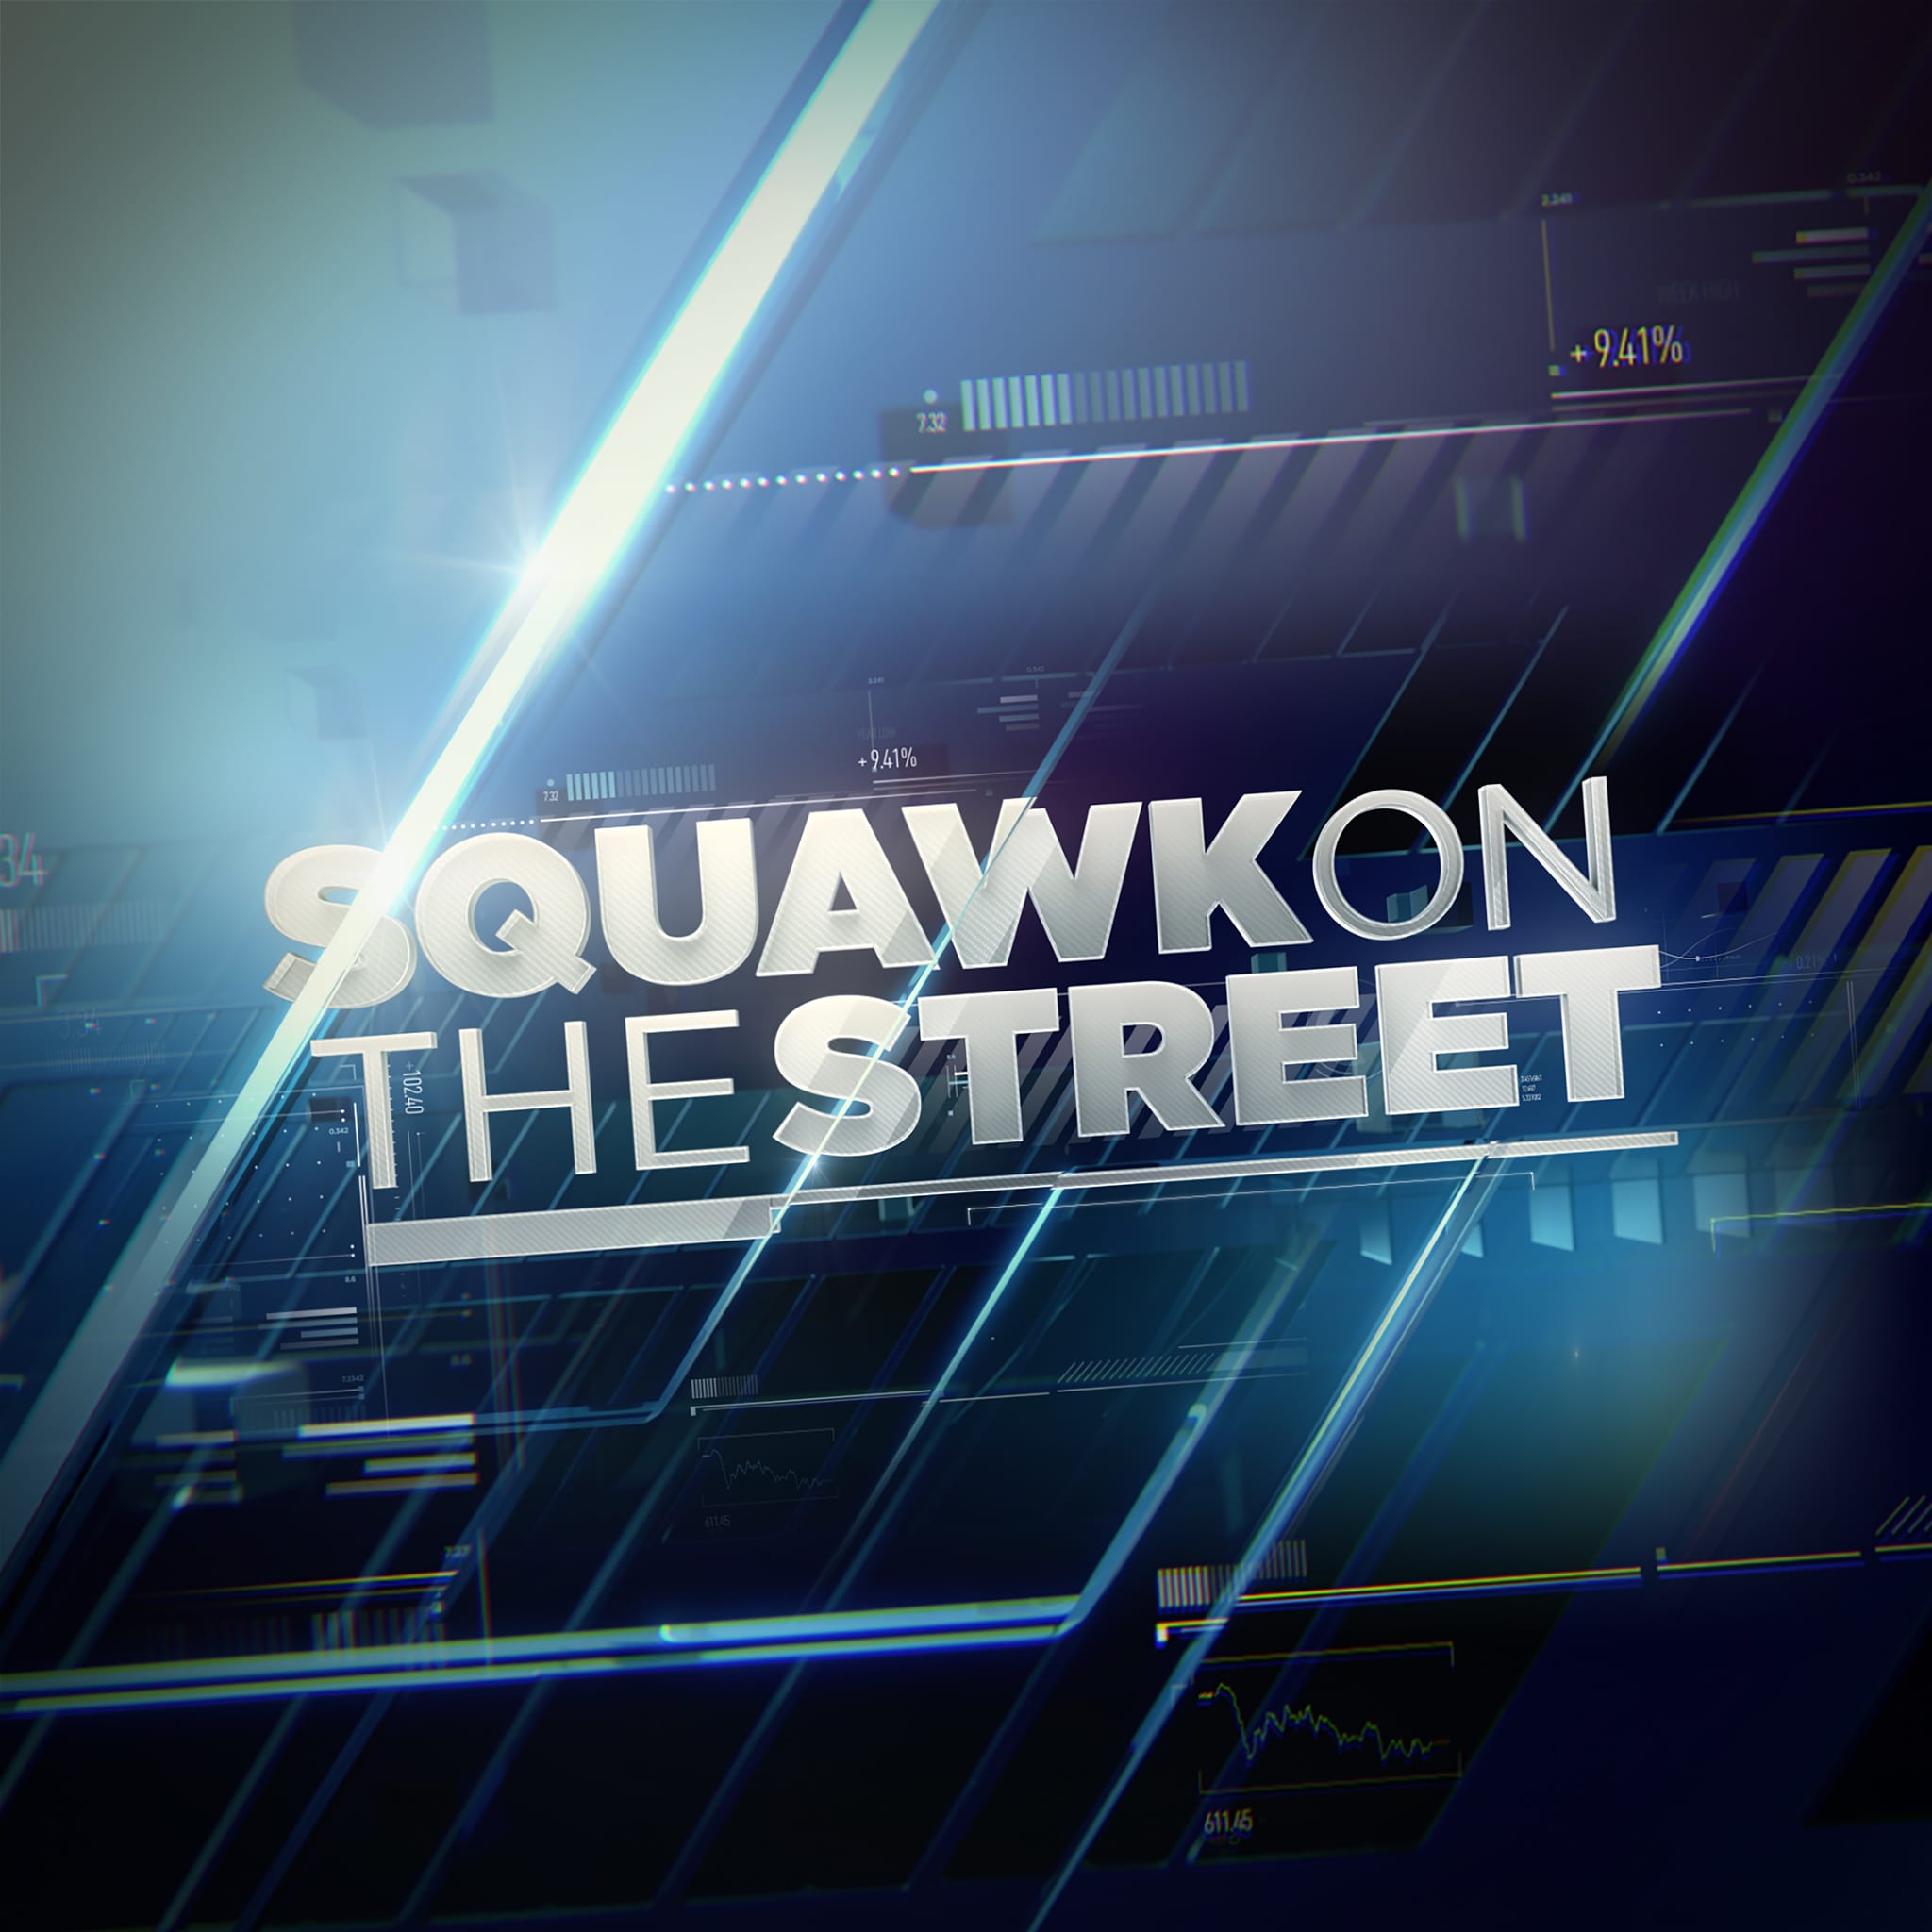 Advertise on Squawk on the Street Podcast with AudioGO